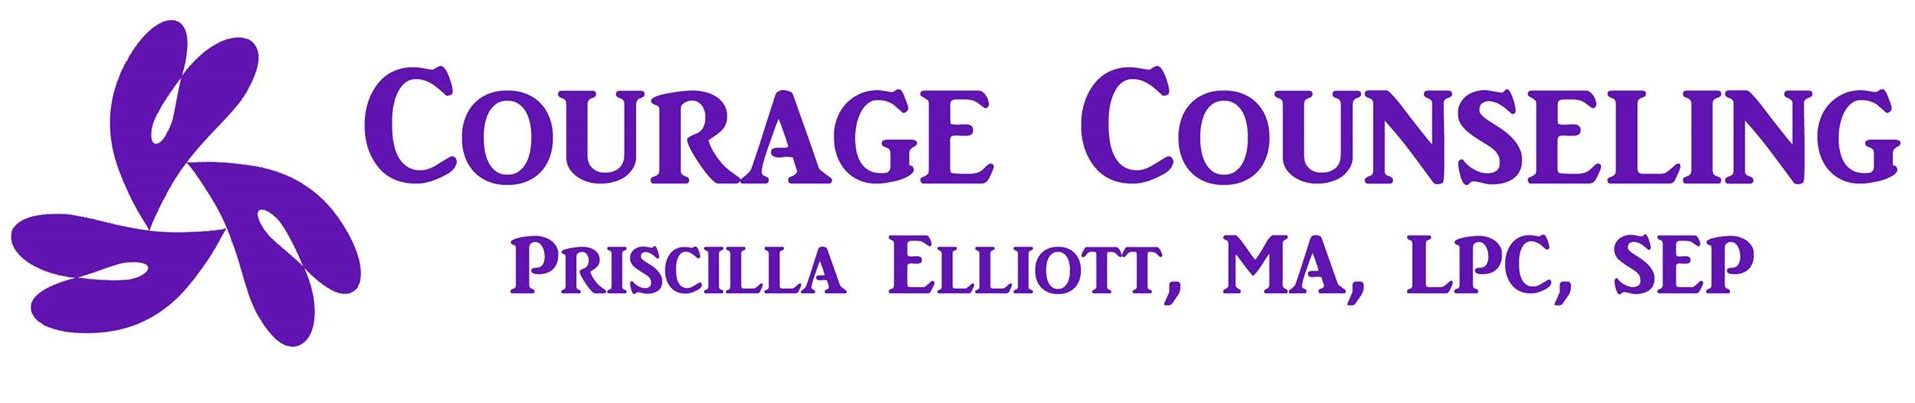 Courage Counseling, PLLC